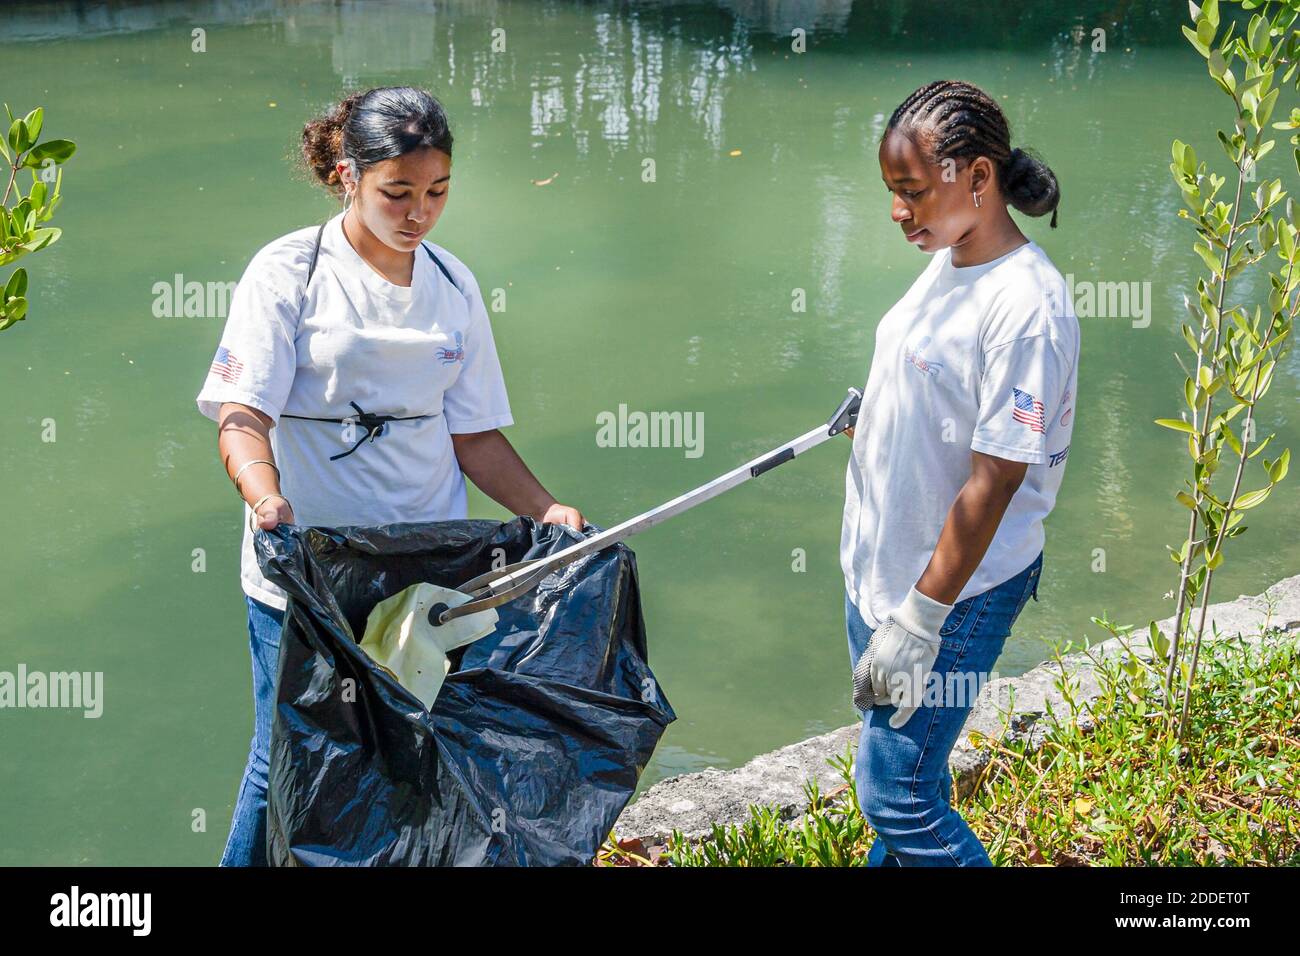 Miami Beach Florida,Dade Canal teen teens student students,Job Corps workers volunteers cleaning collecting collect trash,Black Hispanic girls plastic Stock Photo